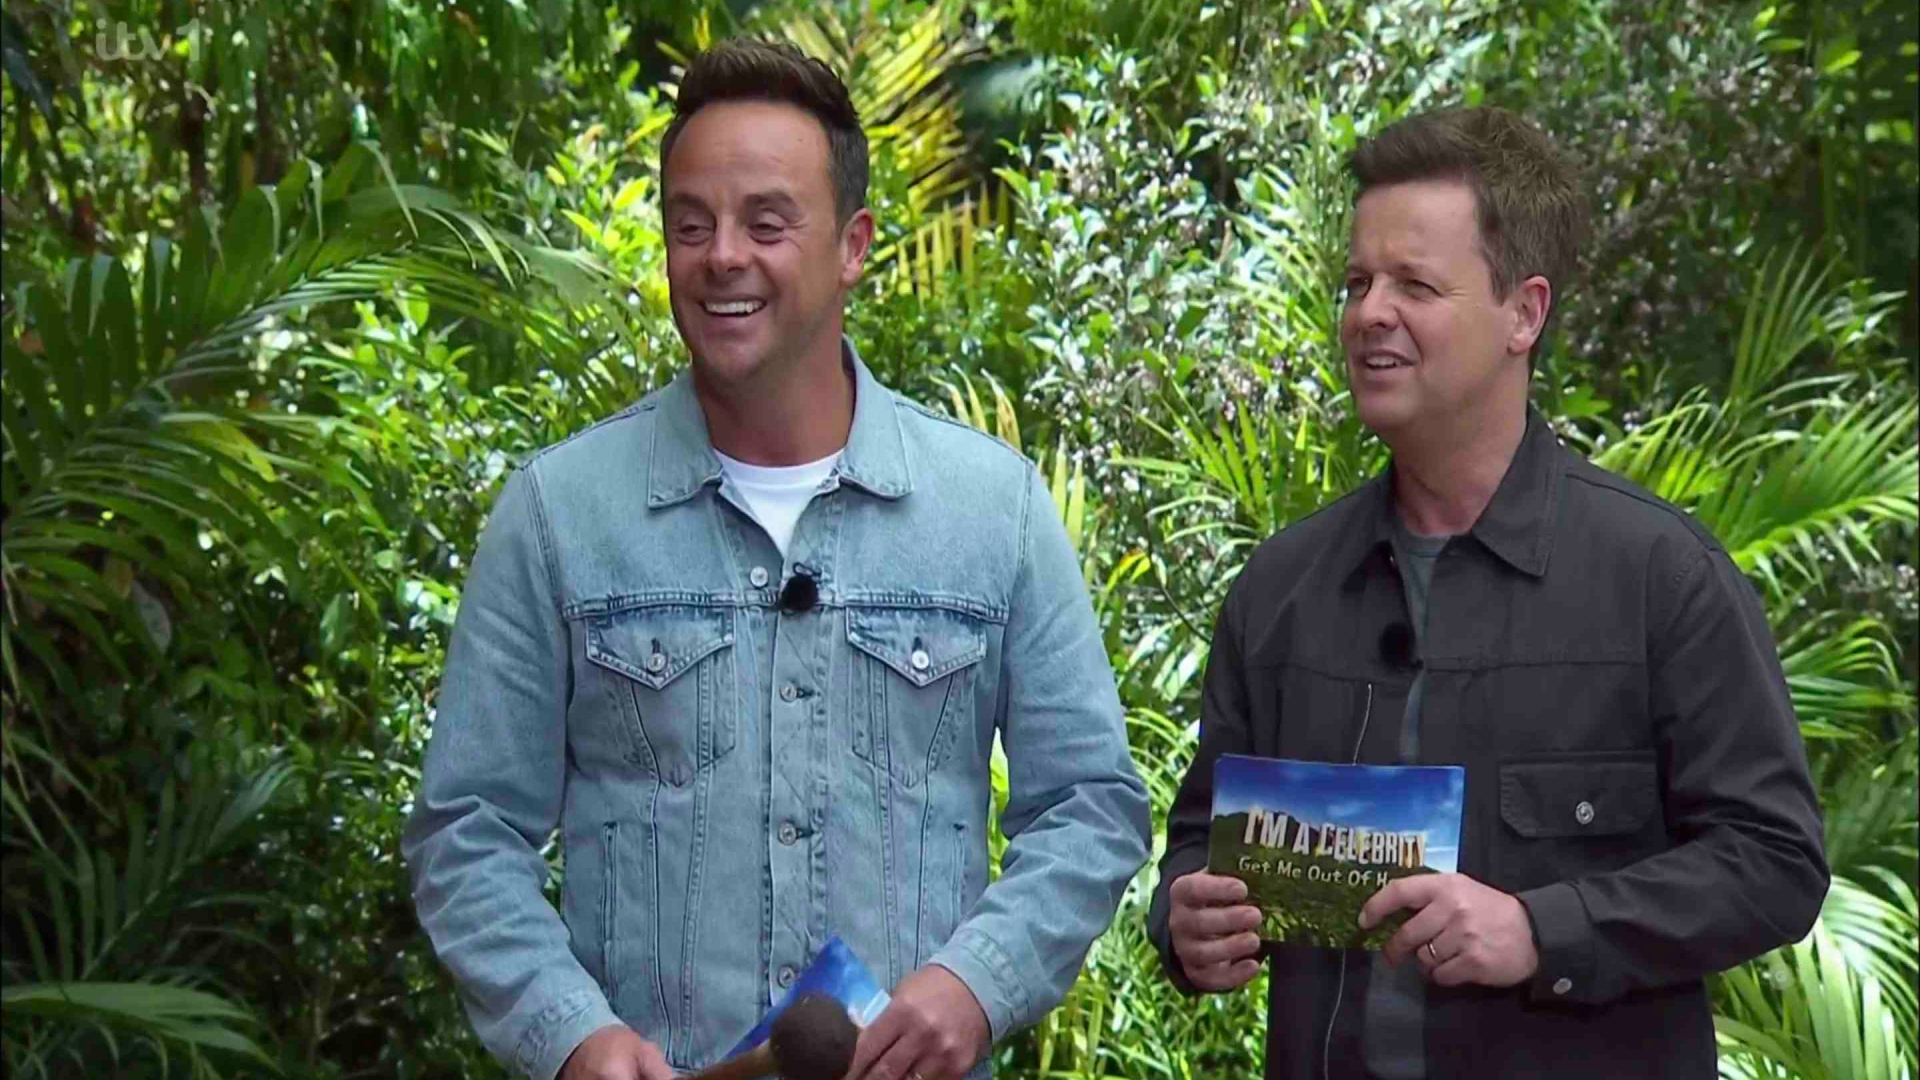 Over 3,000 Ofcom complaints were filed about I’m a Celeb as fans rage at a controversial campmate